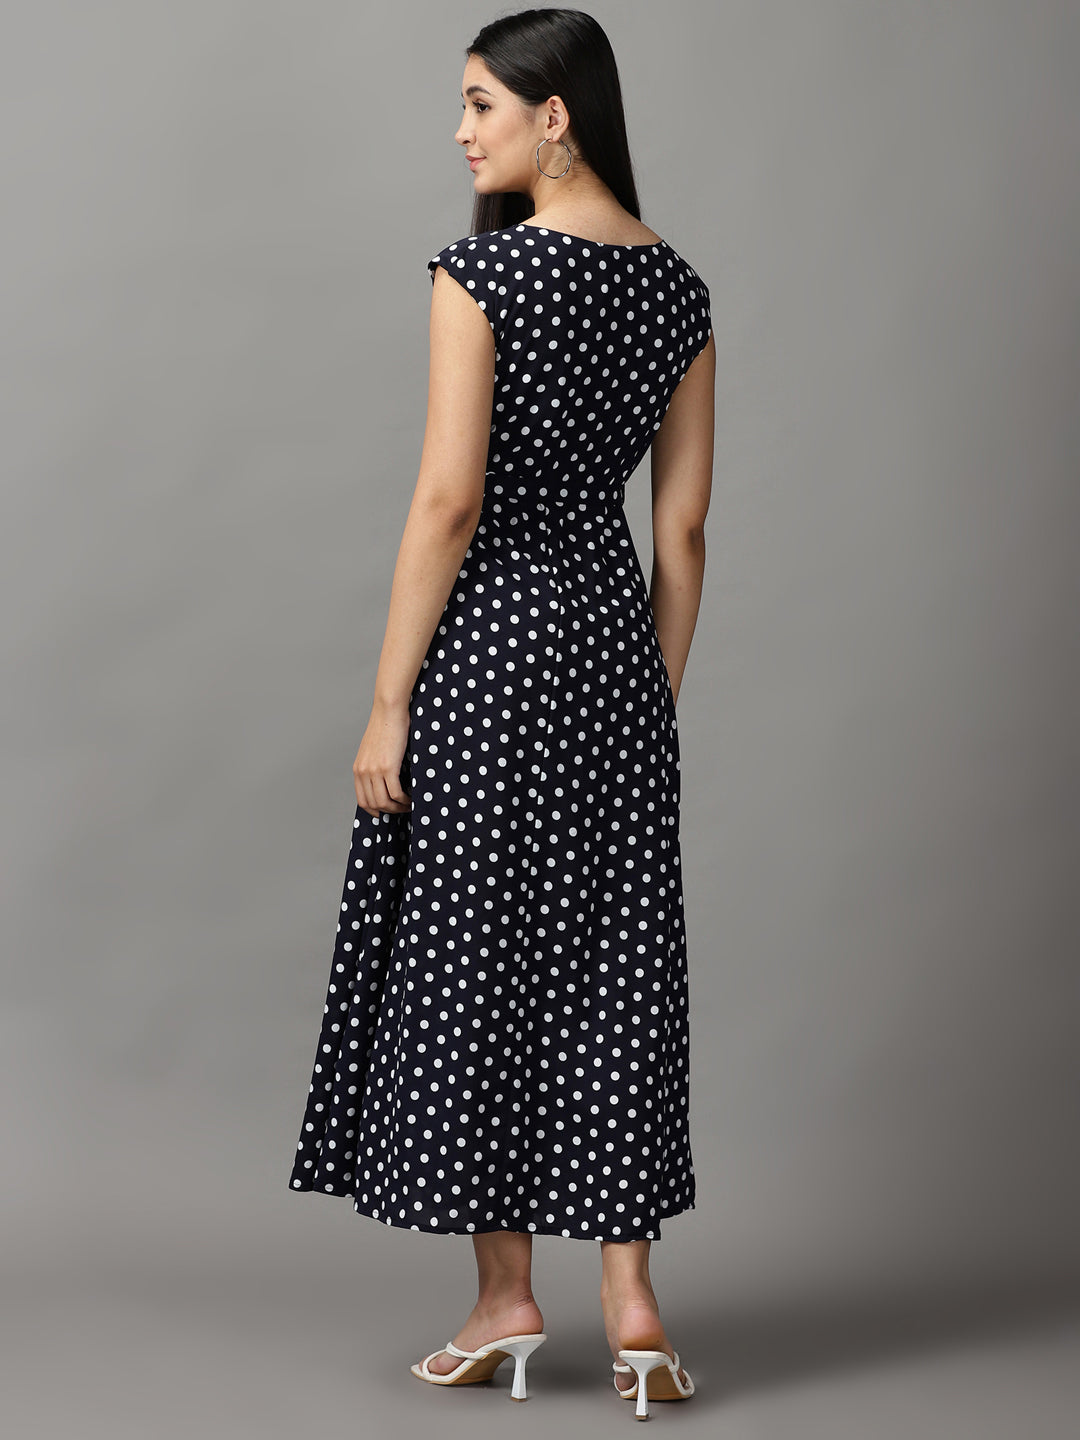 Women's Blue Polka Dots Fit and Flare Dress